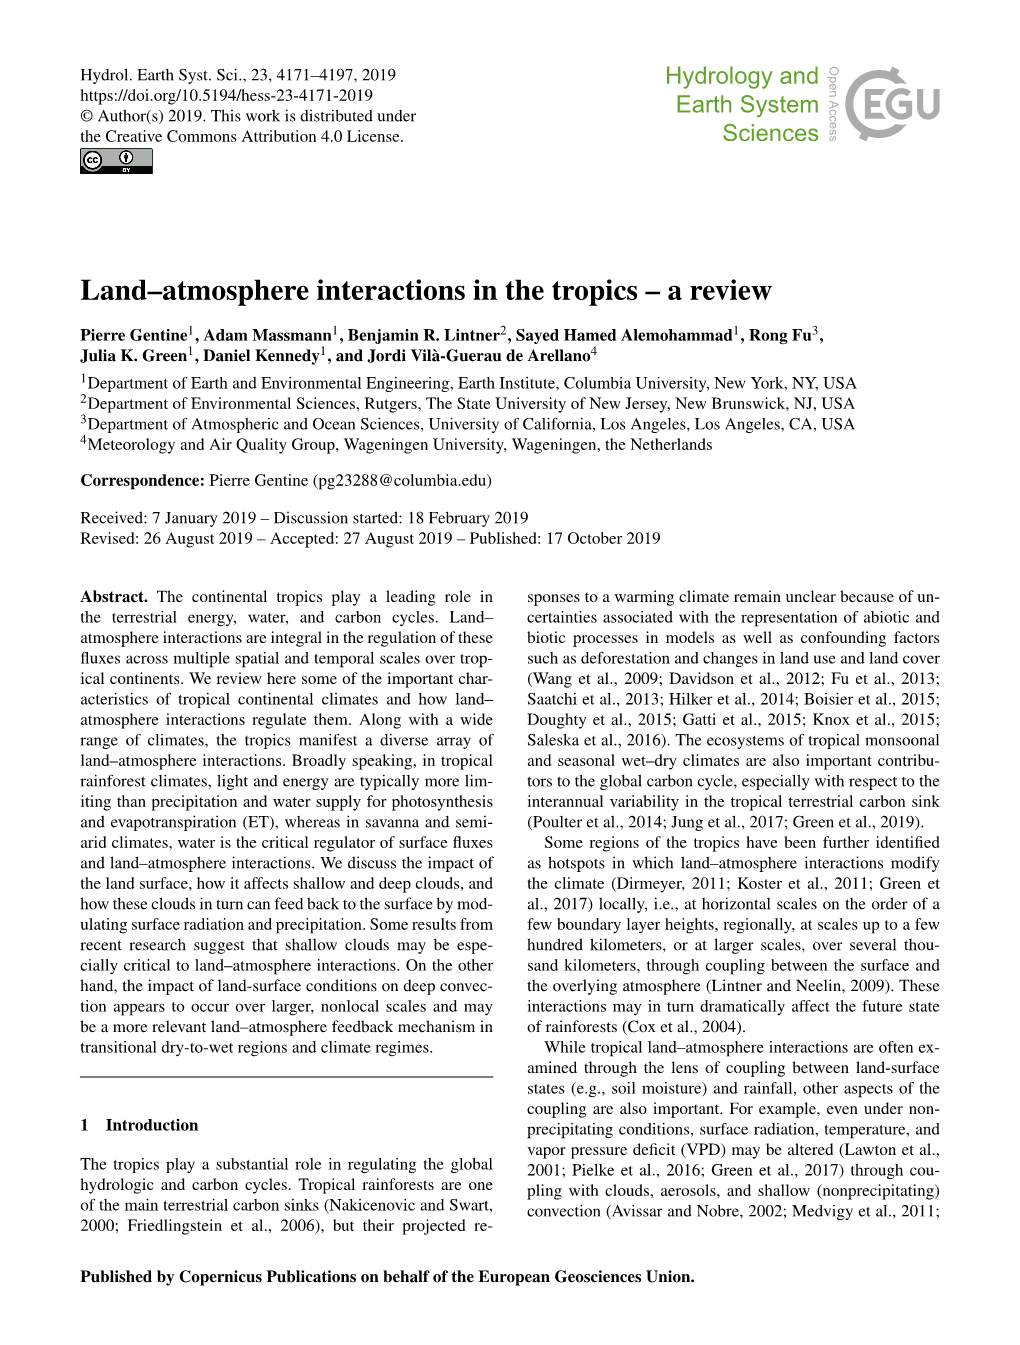 Land–Atmosphere Interactions in the Tropics – a Review